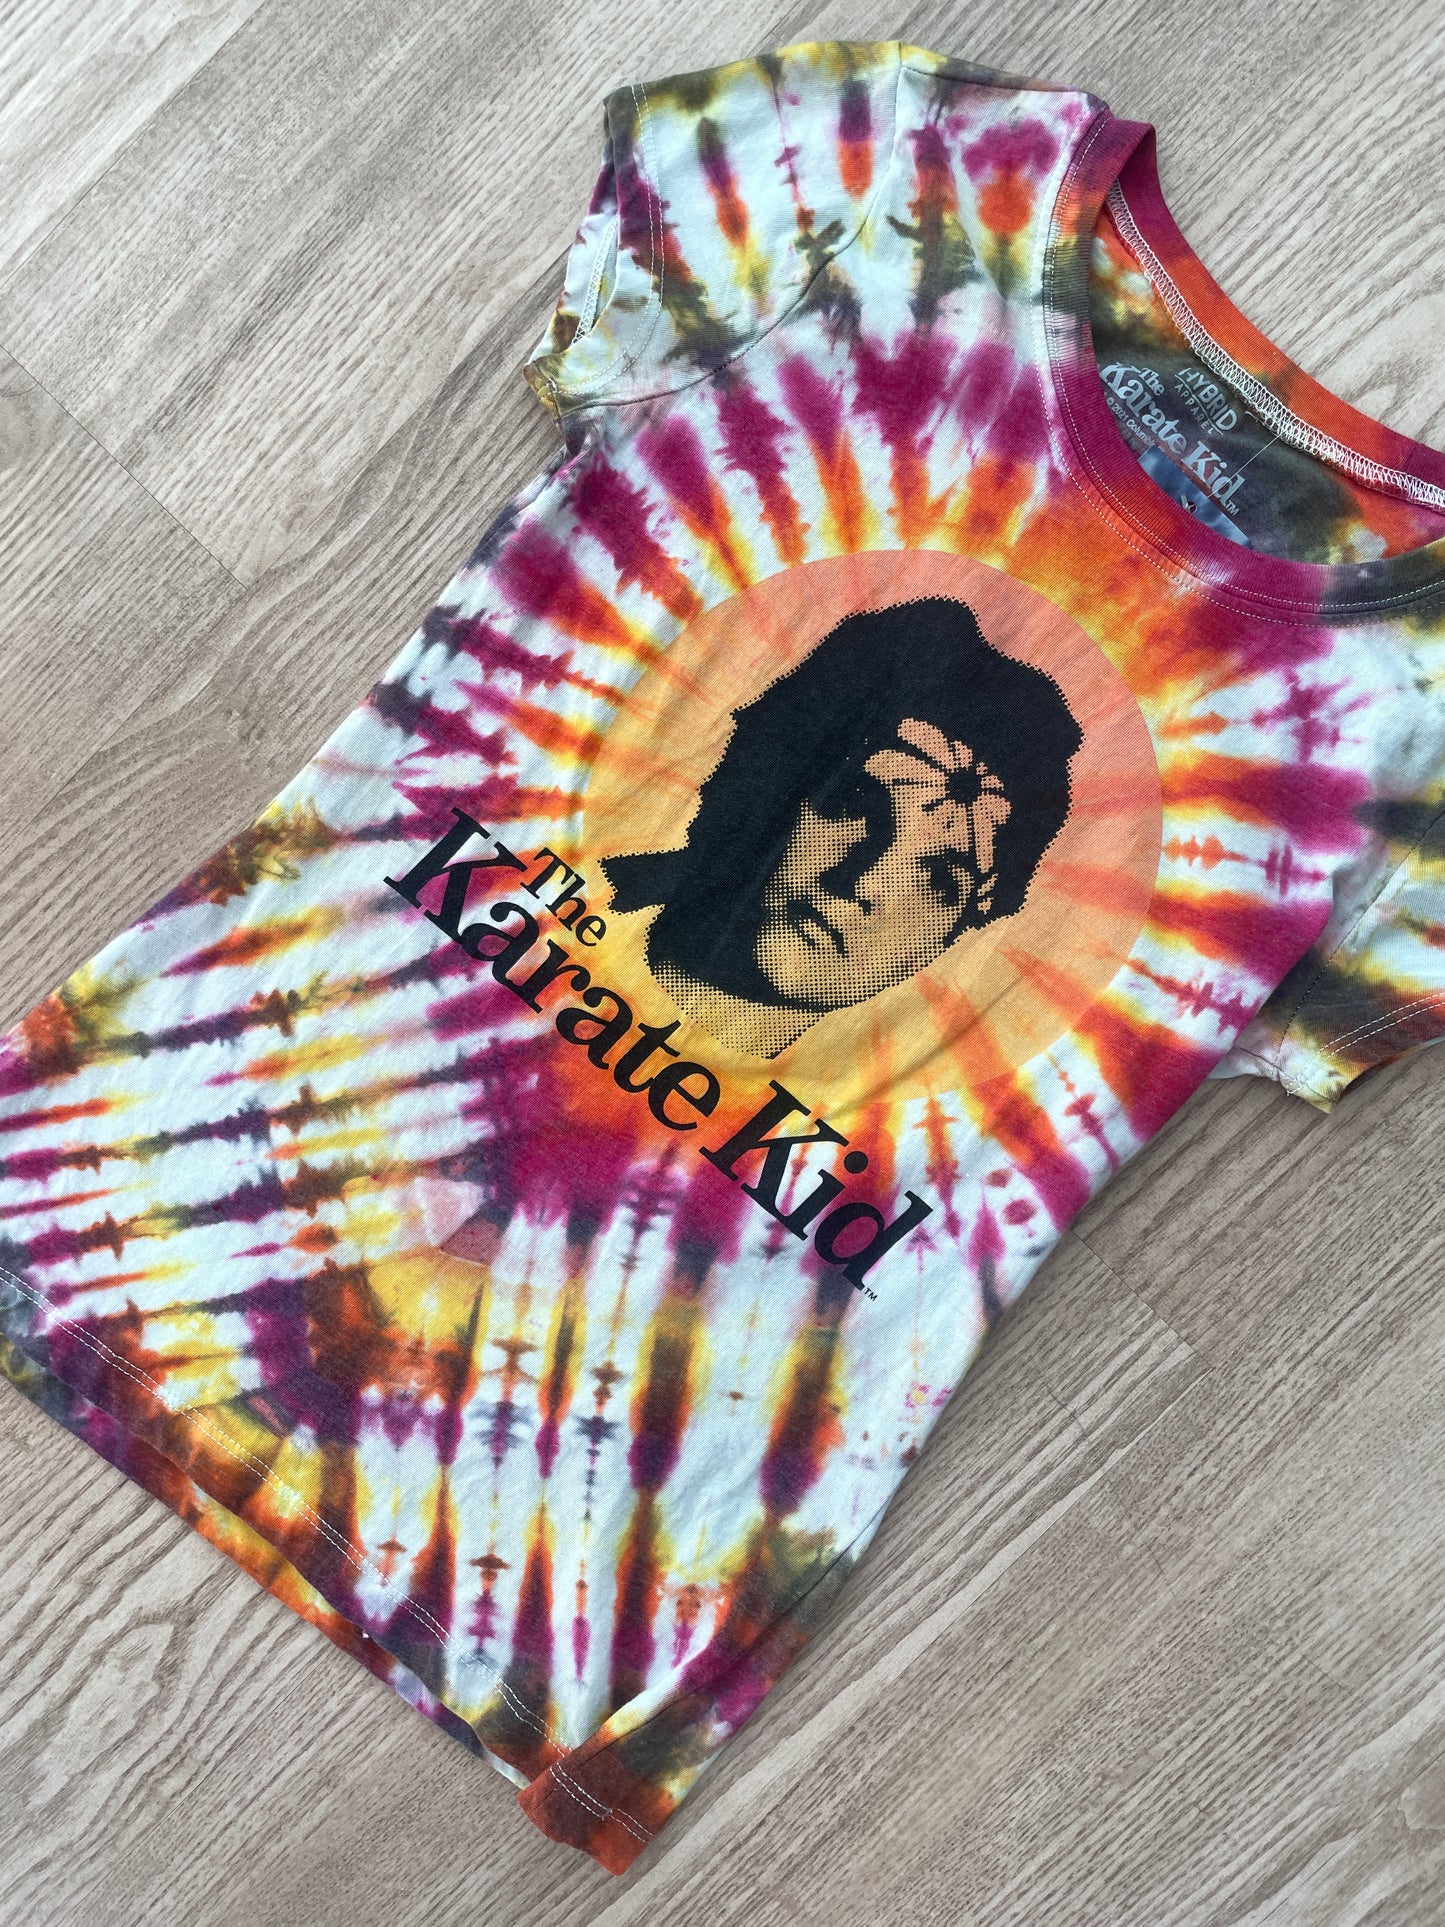 MEDIUM Juniors' Karate Kid Daniel LaRusso Tie Dye Short Sleeve T-Shirt | One-Of-a-Kind Upcycled Tan and Pink Pleated Top